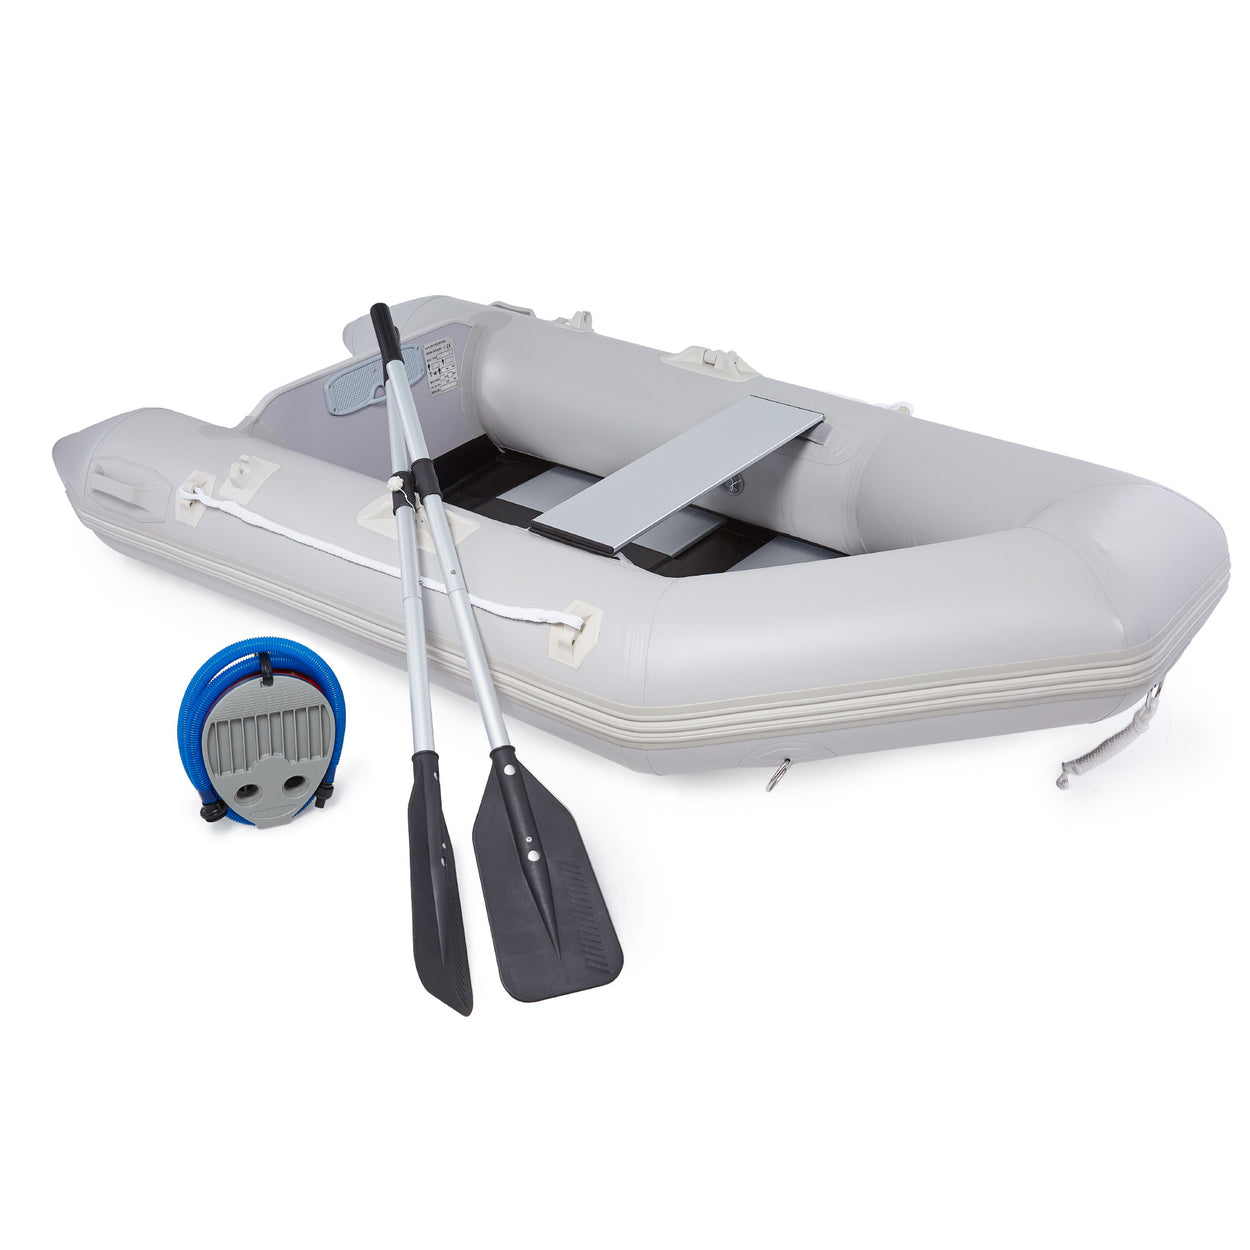 CO-Z 7.5 ft Inflatable Dinghy Boats with Aluminium Alloy Floor, 2 Pers